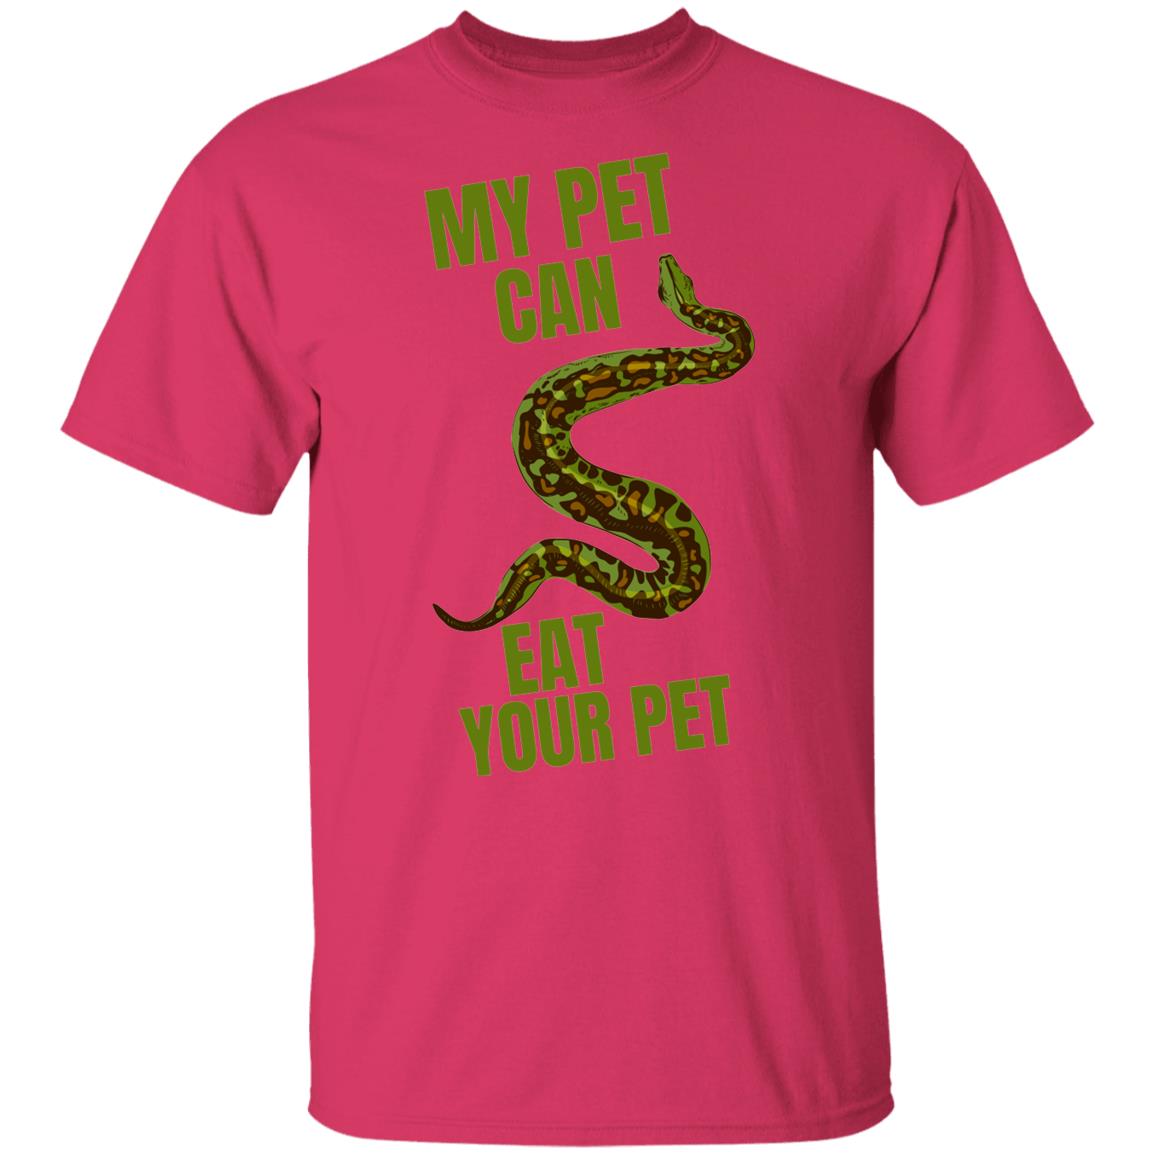 My Pet Can Eat Your Pet - Youth T-Shirt